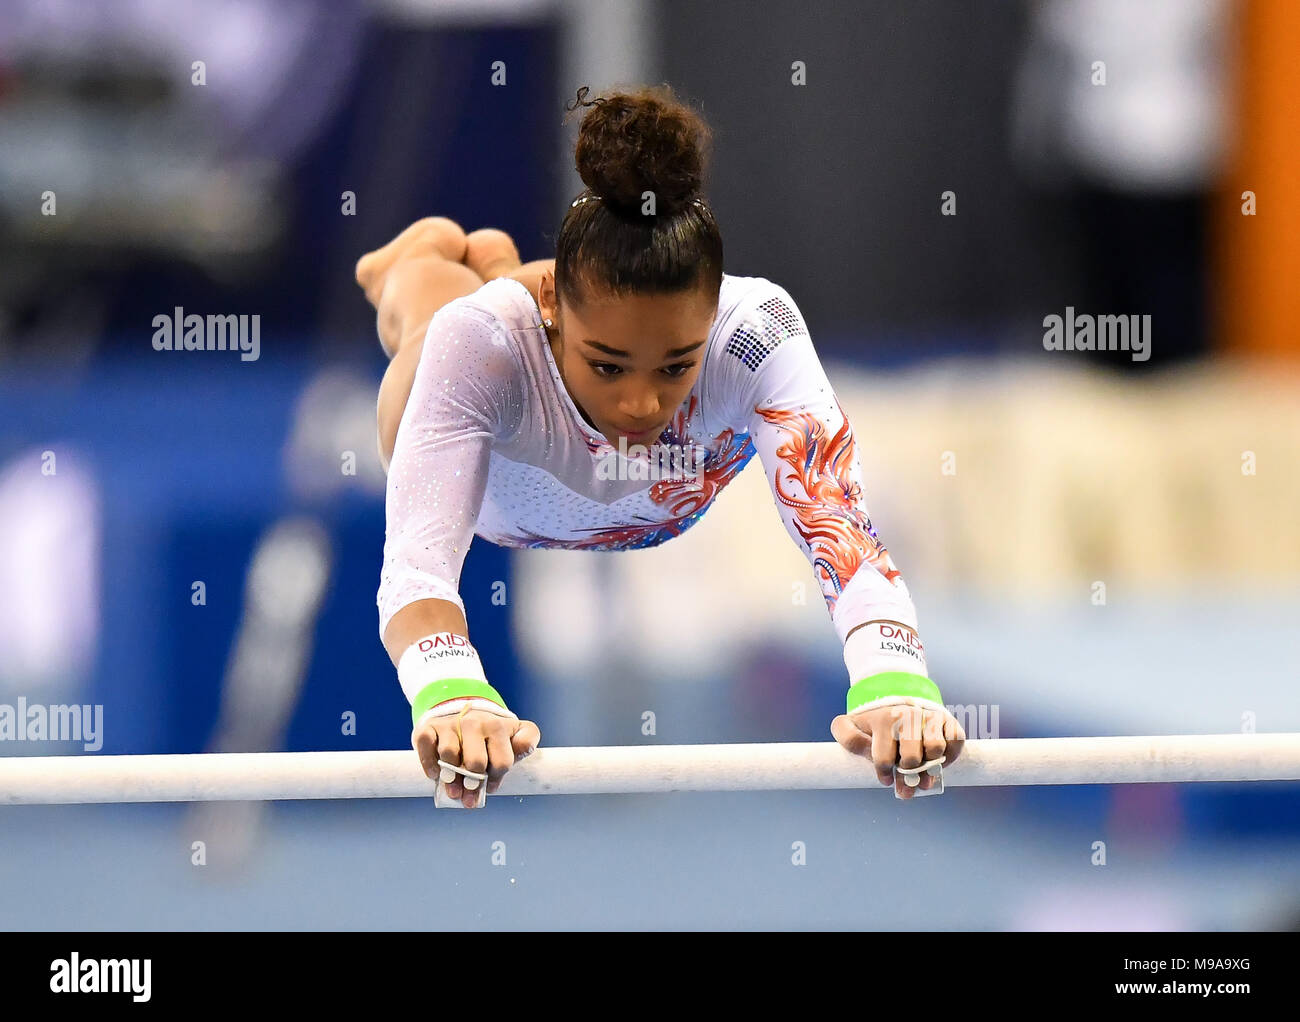 Doha, Qatar. 23rd Mar, 2018. Melanie de Jesus dos Santos of France competes during the Women's Uneven Bars final at the 11th FIG Artistic Gymnastics World Cup in Doha, Qatar, on March 23, 2018. Melanie de Jesus dos Santos took the bronze with 14.400 points. Credit: Nikku/Xinhua/Alamy Live News Stock Photo